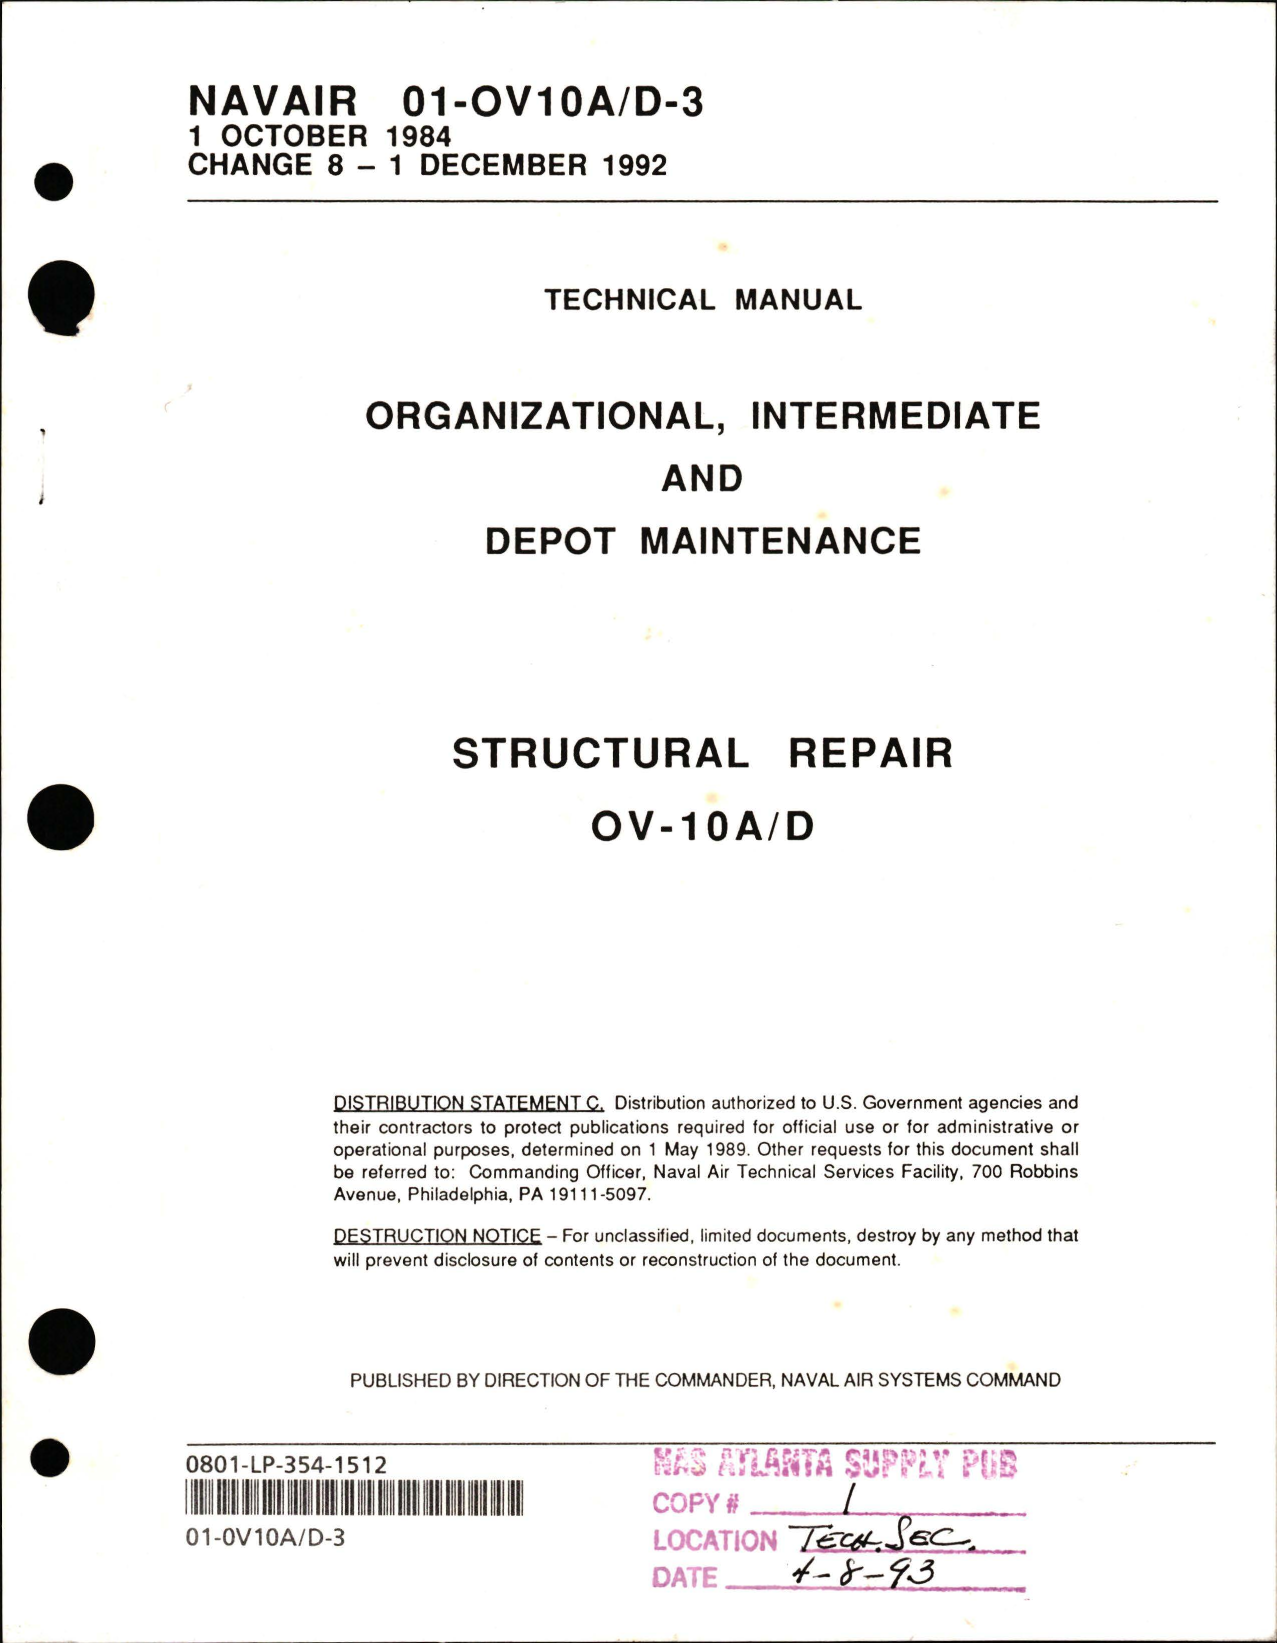 Sample page 1 from AirCorps Library document: Organizational, Intermediate and Depot Maintenance for Structural Repair on the OV-10A/D